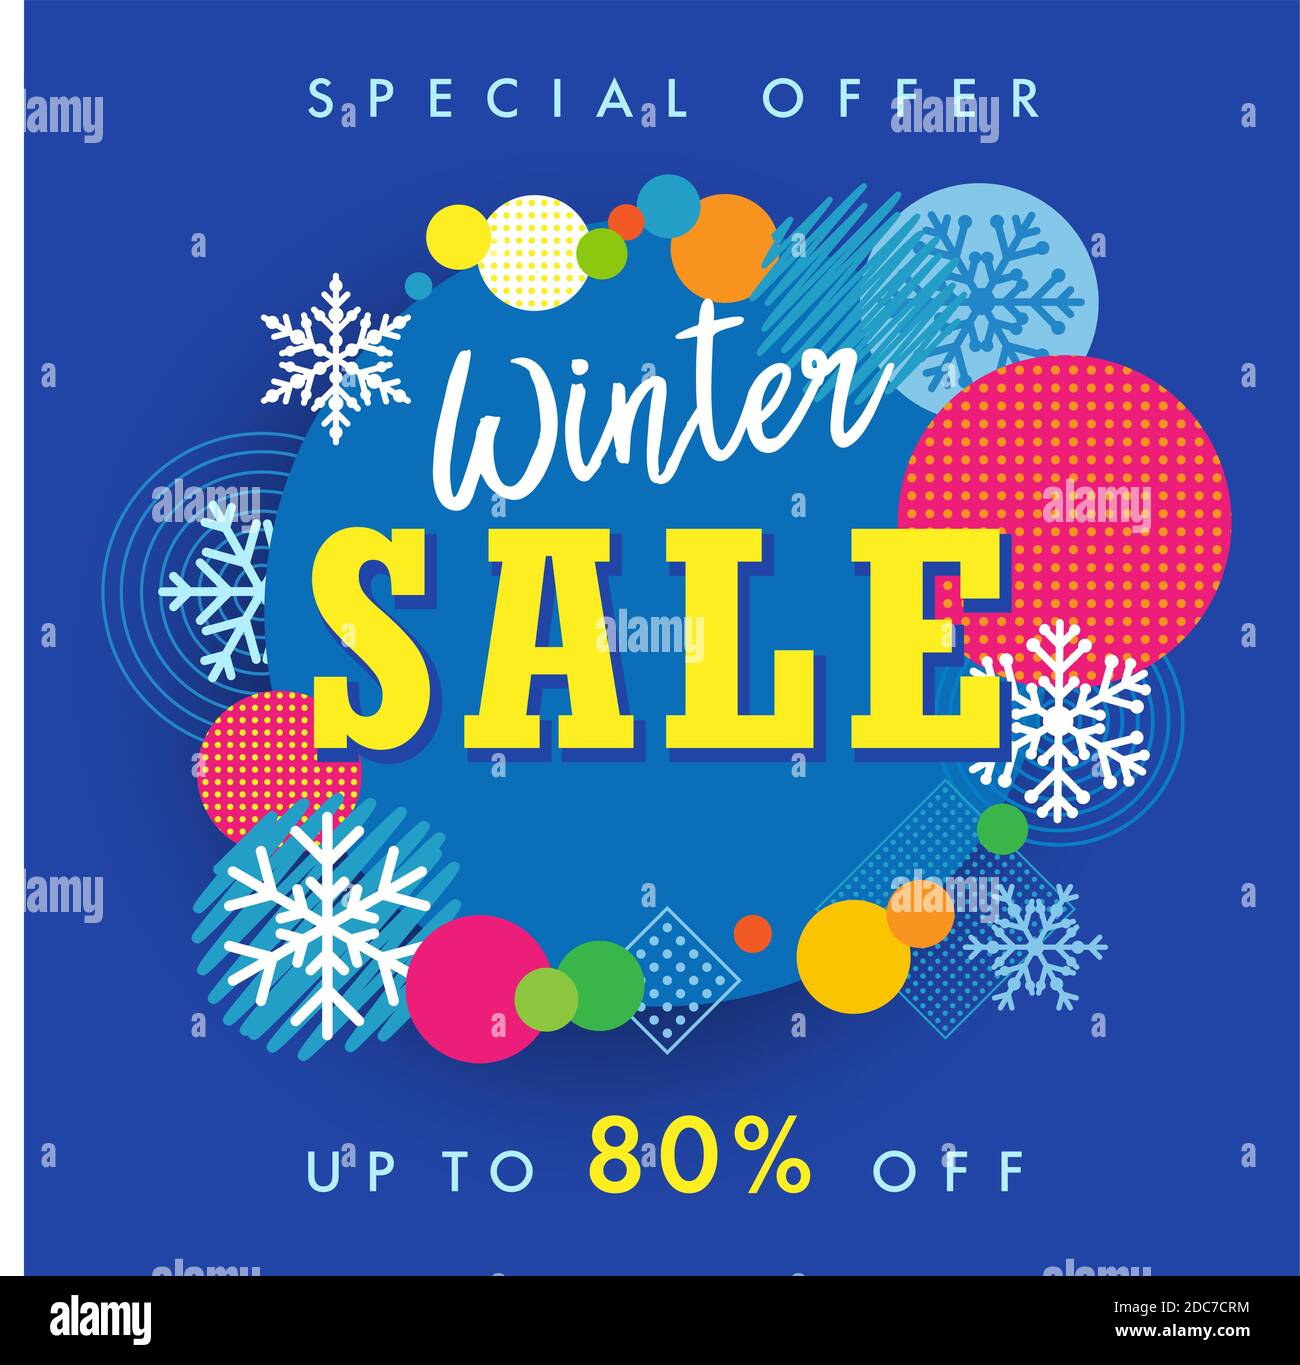 Winter sale special offer banner, colored circle and snow template. Big winter sale special offer up to 80% end of season special offer banner. Vector Stock Vector